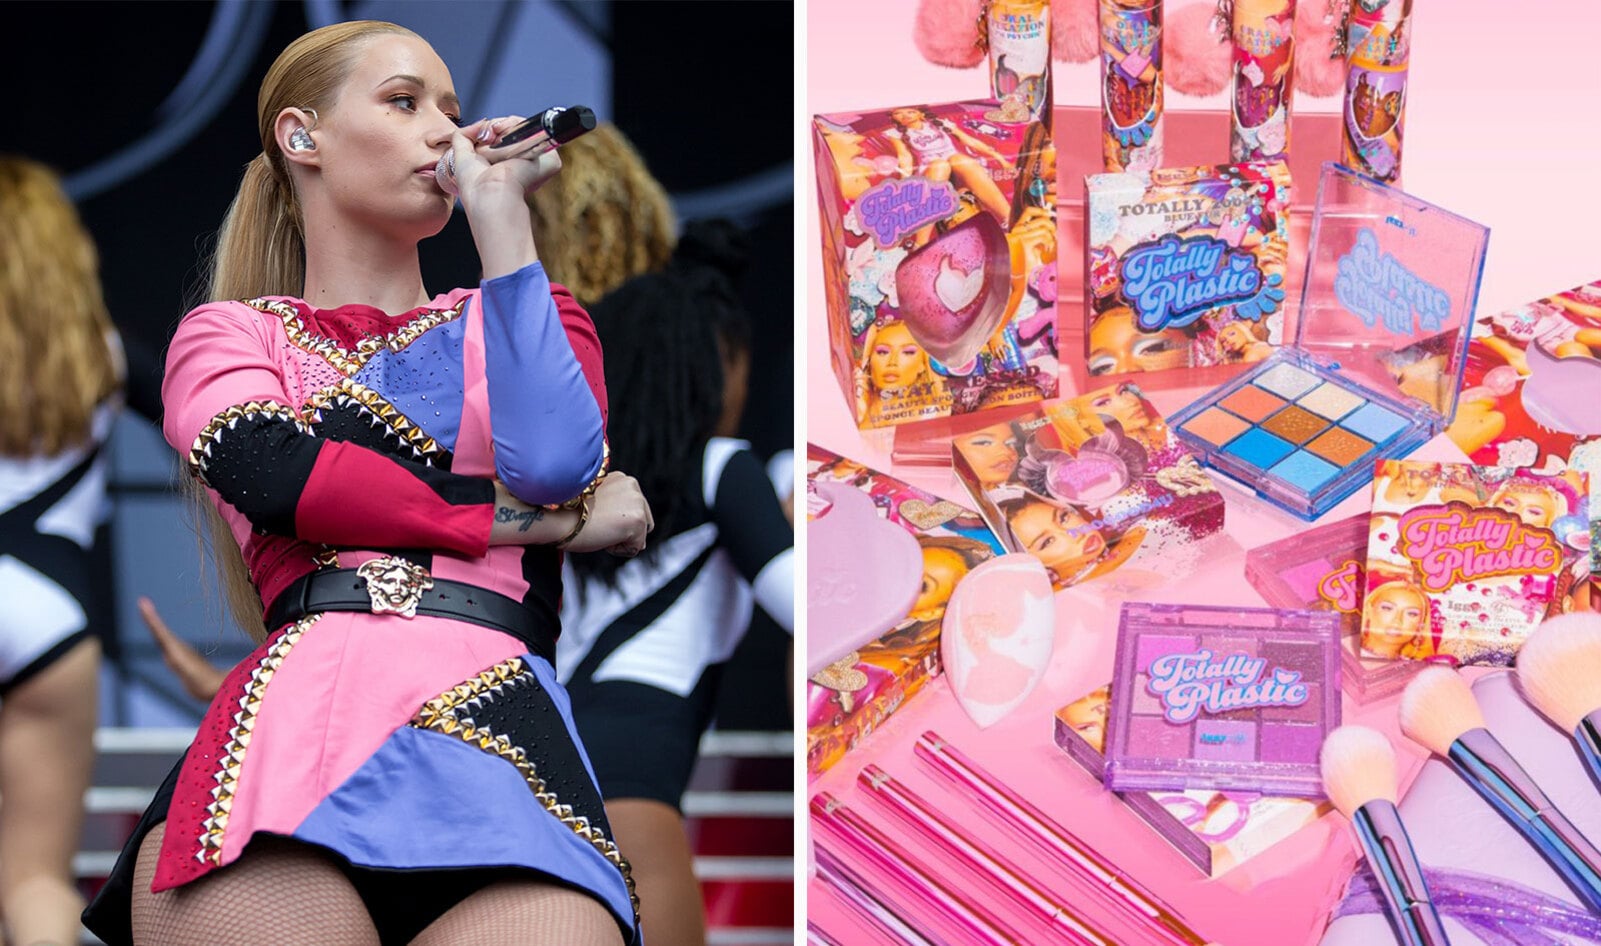 Iggy Azalea Joins the Celebrity Vegan Makeup Trend with Launch of Totally Plastic at ULTA